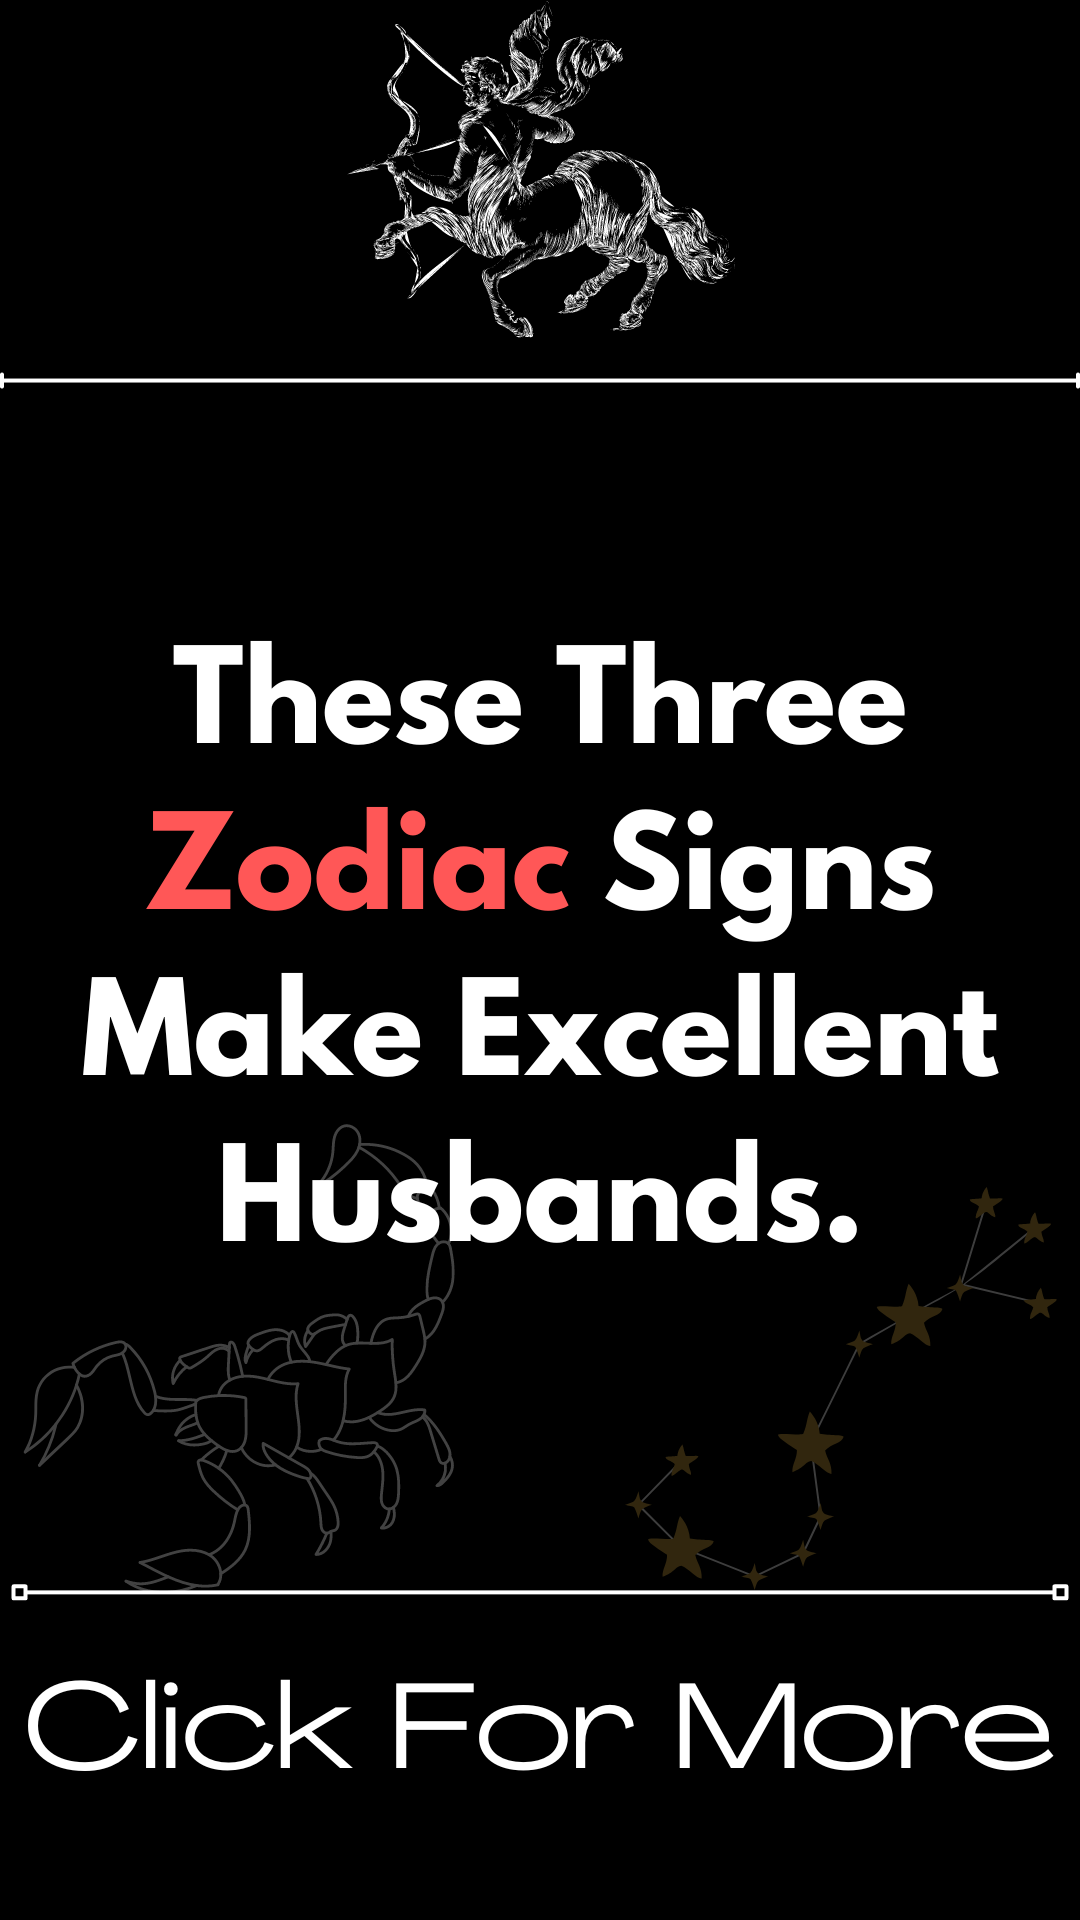 These Three Zodiac Signs Make Excellent Husbands.